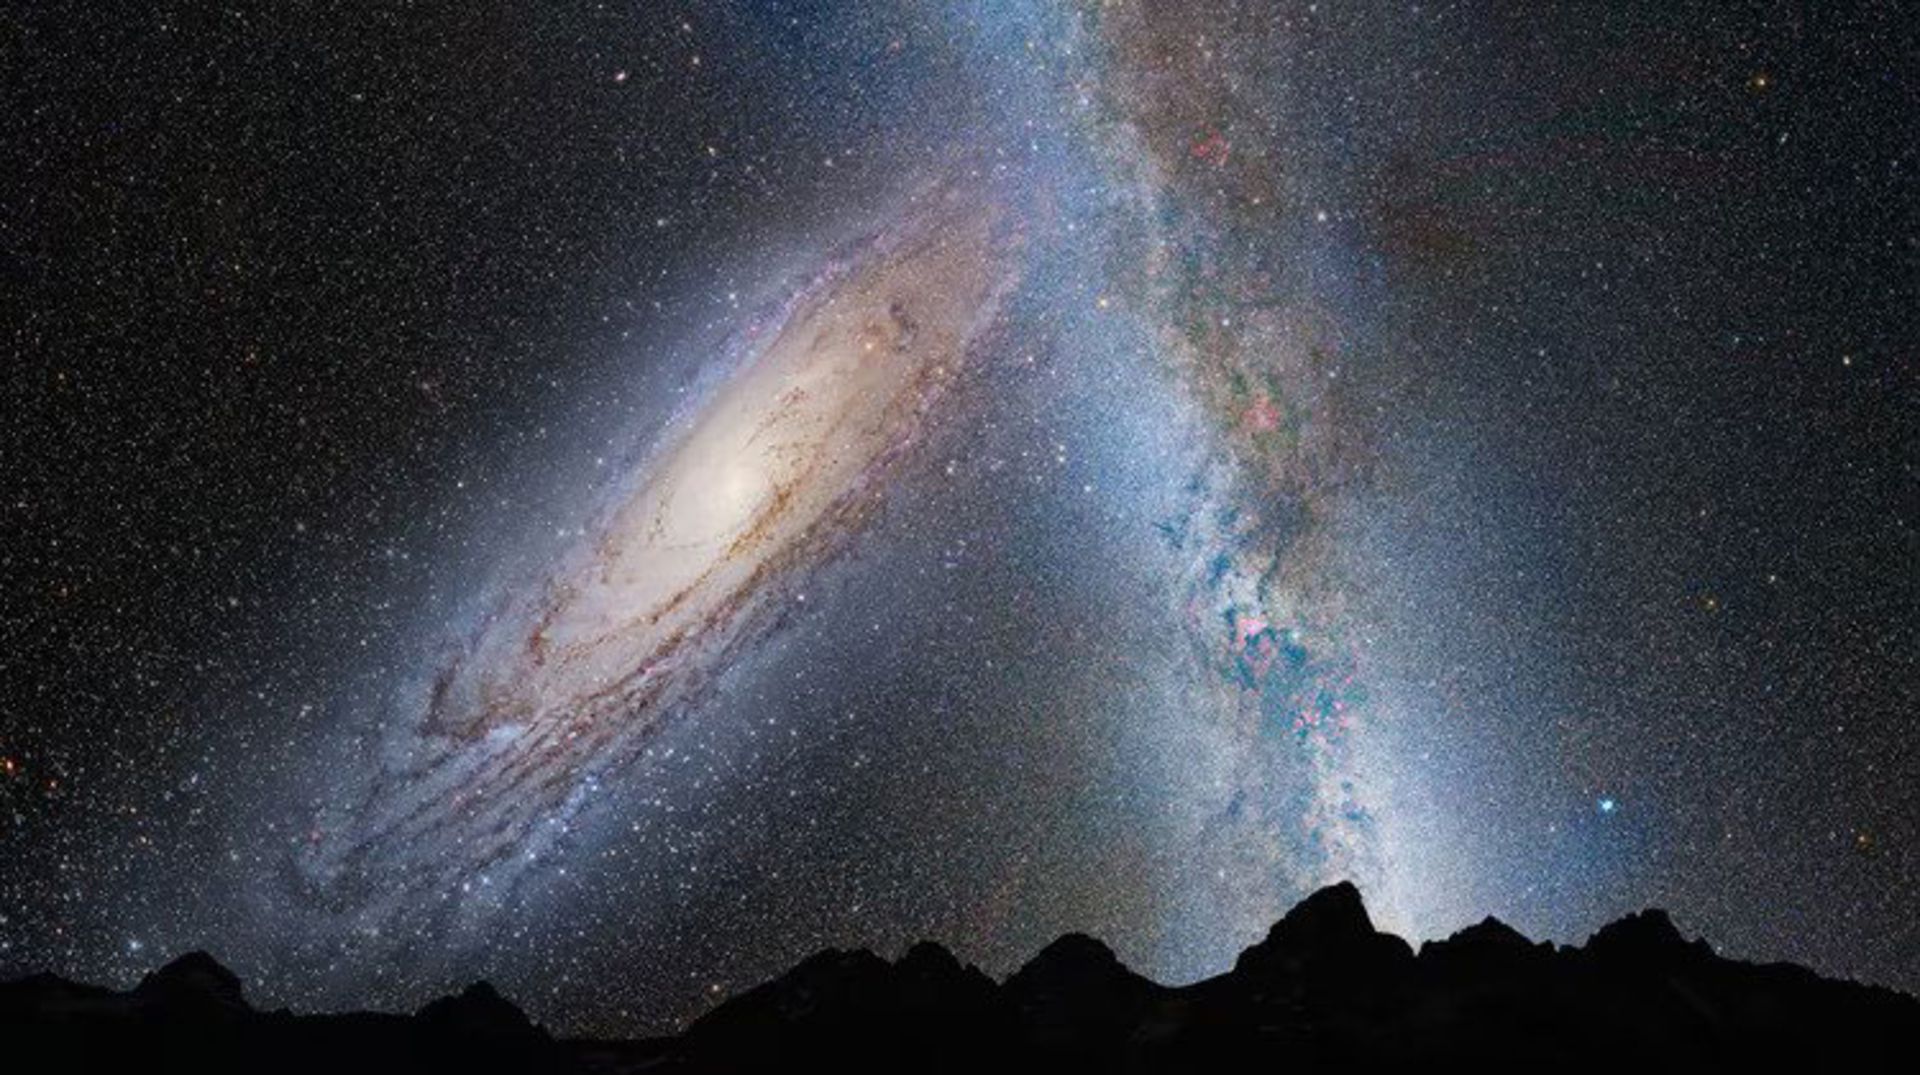 The collision of Andromeda and the Milky Way